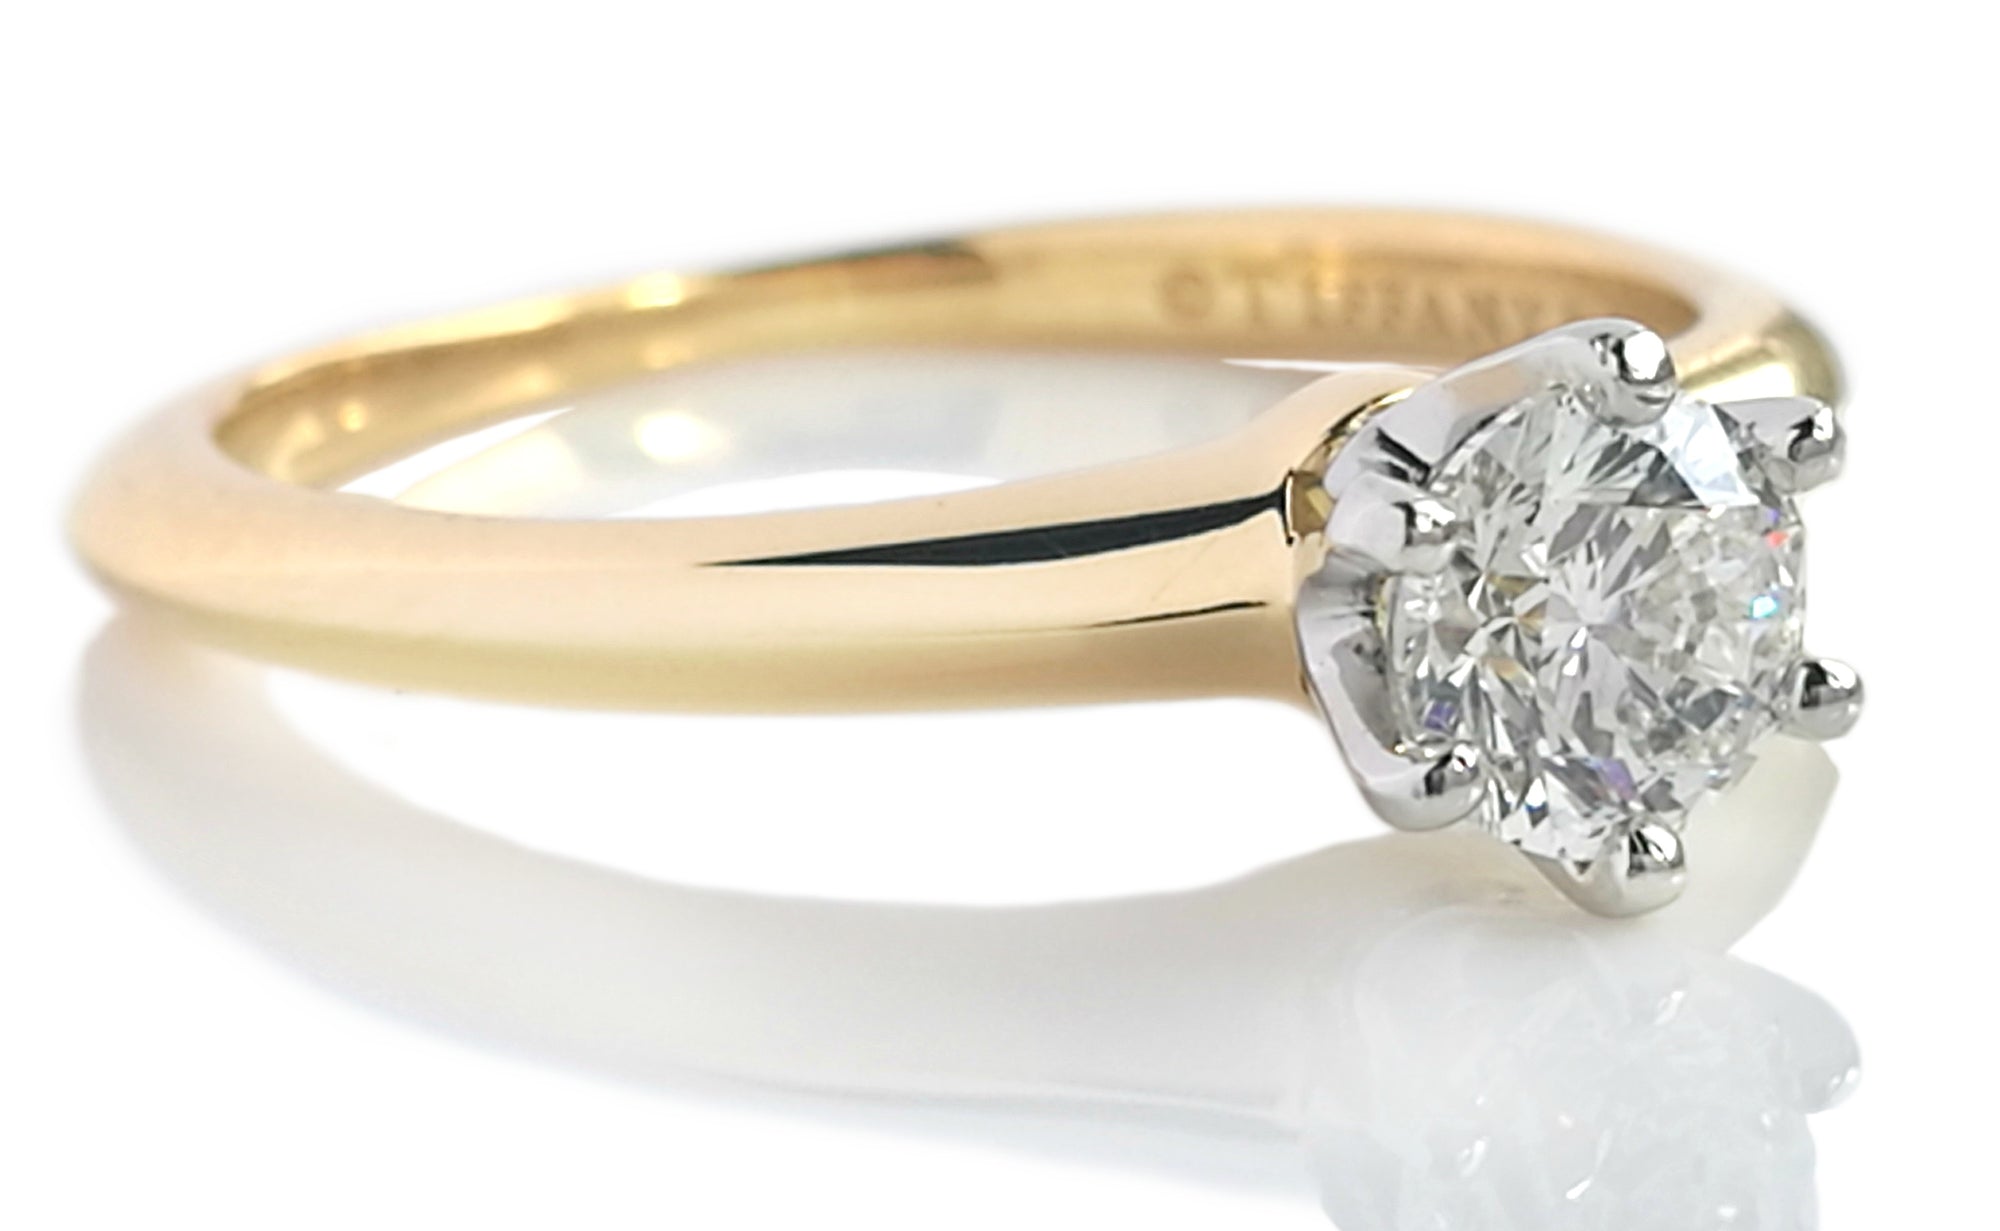 Tiffany & Co. 0.43ct G/VS Round Brilliant Diamond Engagement Ring in 18k Yellow Gold